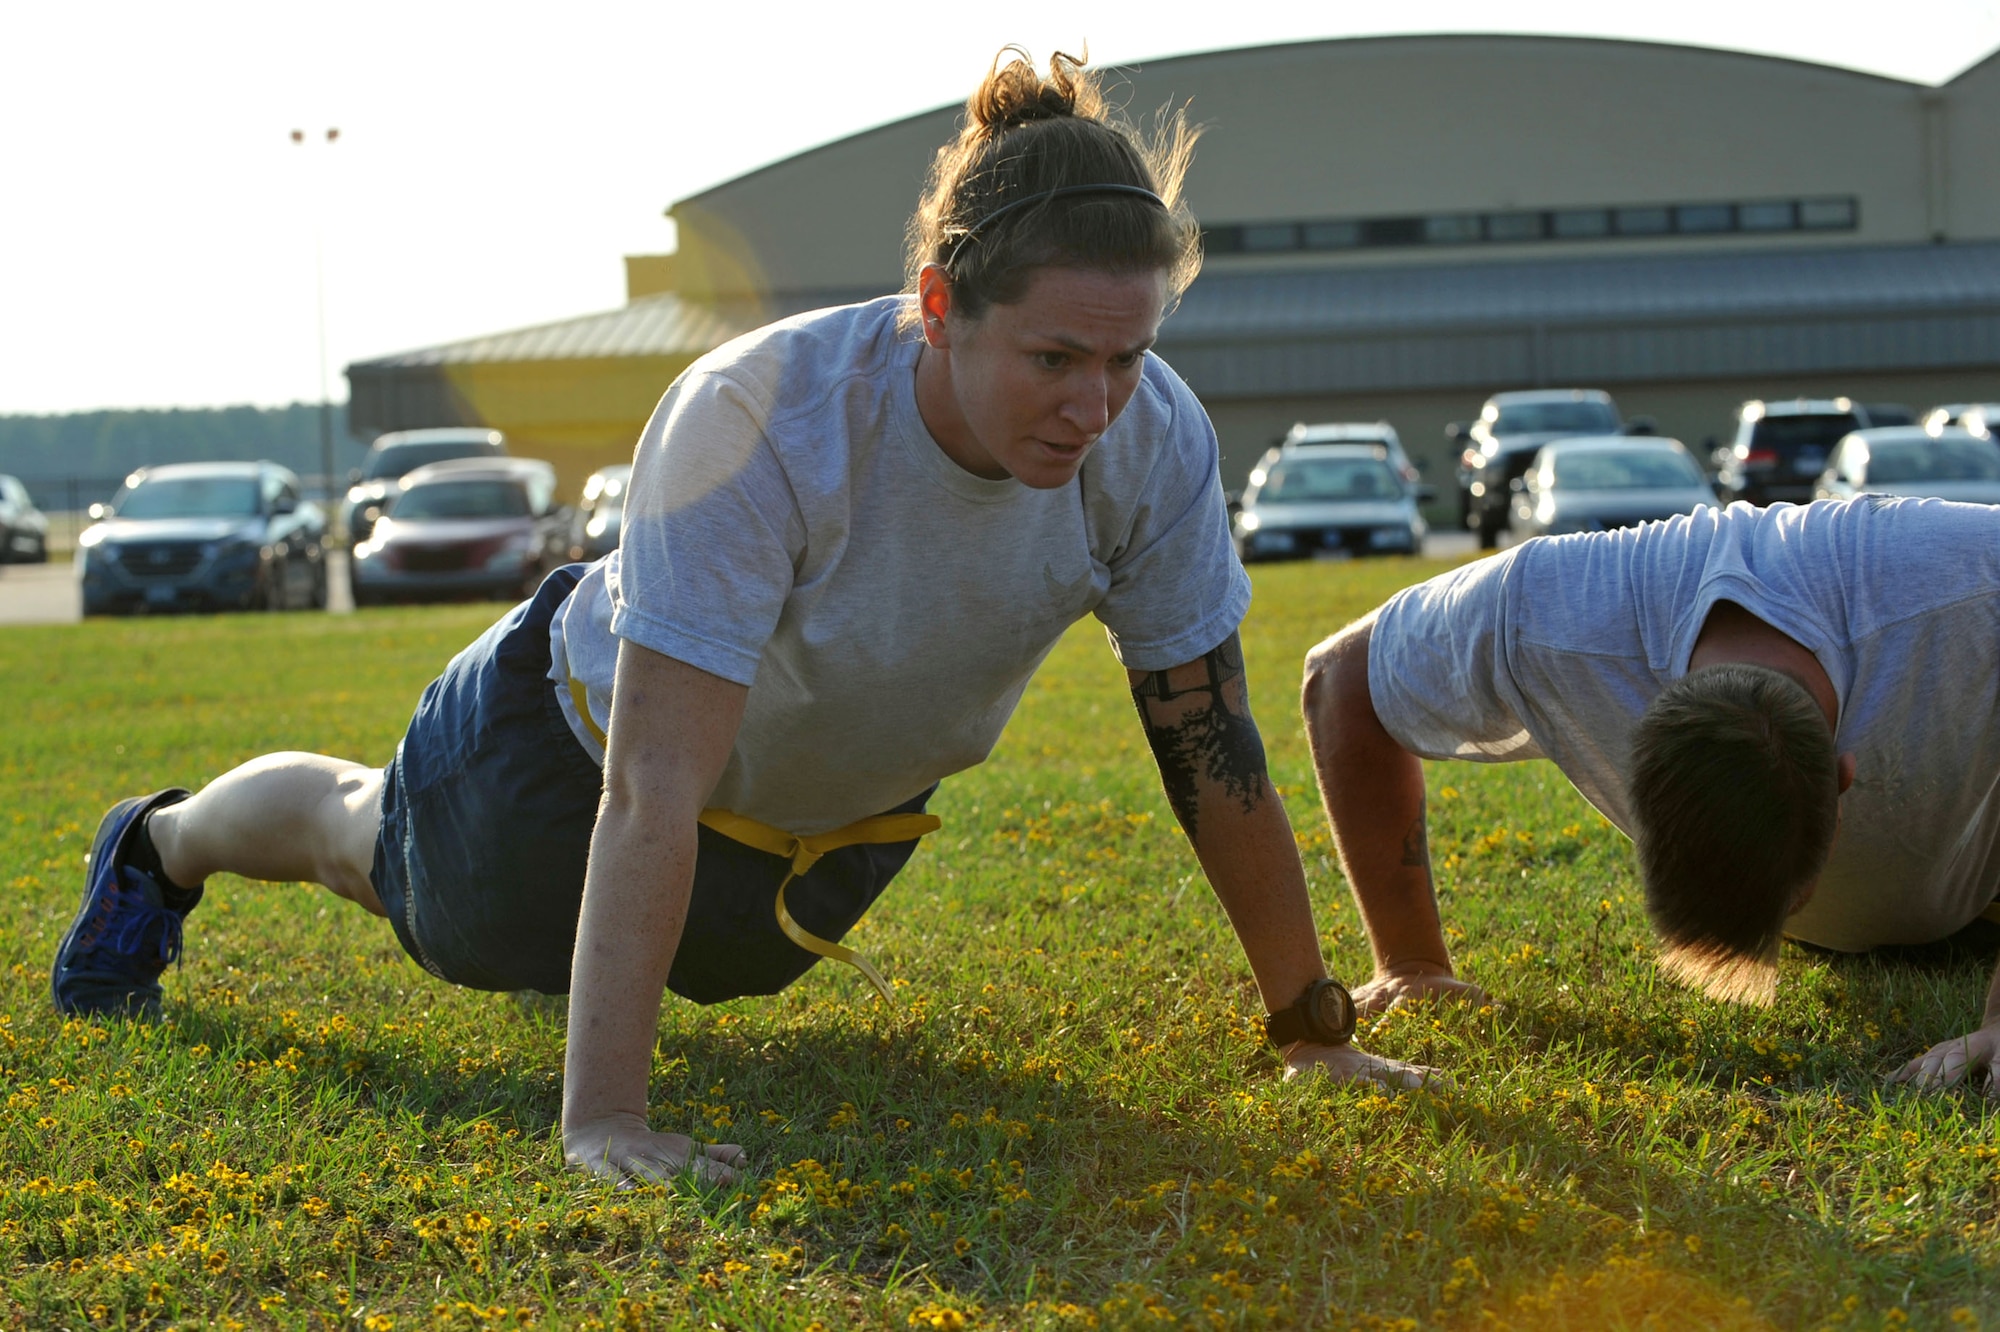 U.S. Air Force 1st Lt. Margaret Haley, 20th Civil Engineer Squadron explosive ordnance disposal flight commander, performs pushups during a Warrior Day challenge hosted by the 20th Medical Group at Shaw Air Force Base, S.C., Sept. 29, 2017.